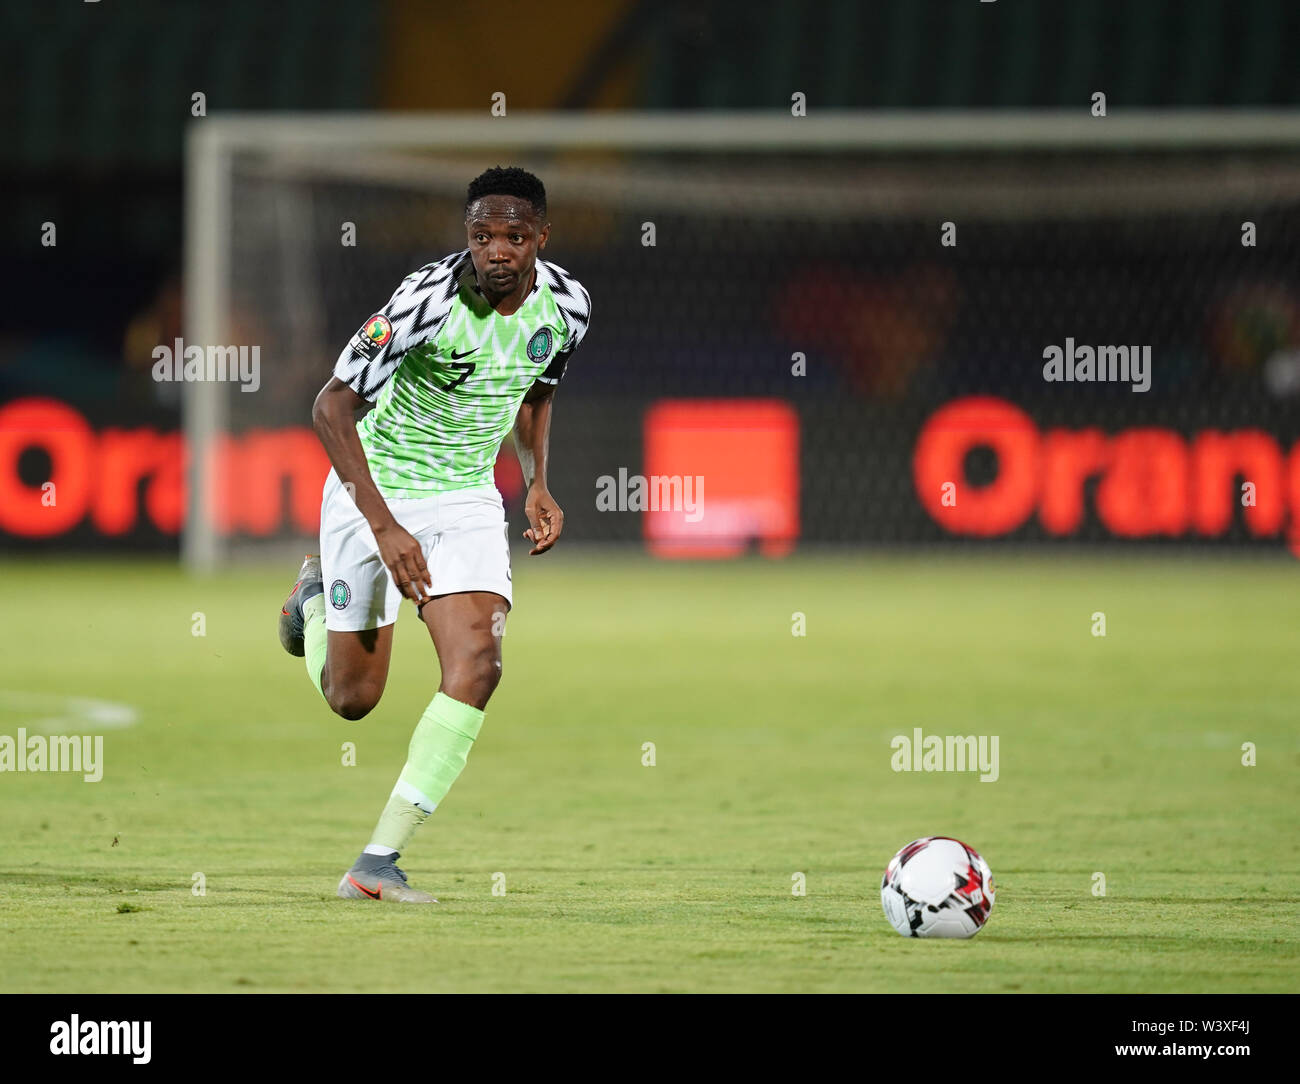 Cairo, Tunisia, Egypt. 17th July, 2019. FRANCE OUT July 17, 2019: Ahmed Musa of Nigeria during the 2019 African Cup of Nations match between Tunisia and Nigeria at the Al Salam Stadium in Cairo, Egypt. Ulrik Pedersen/CSM/Alamy Live News Stock Photo